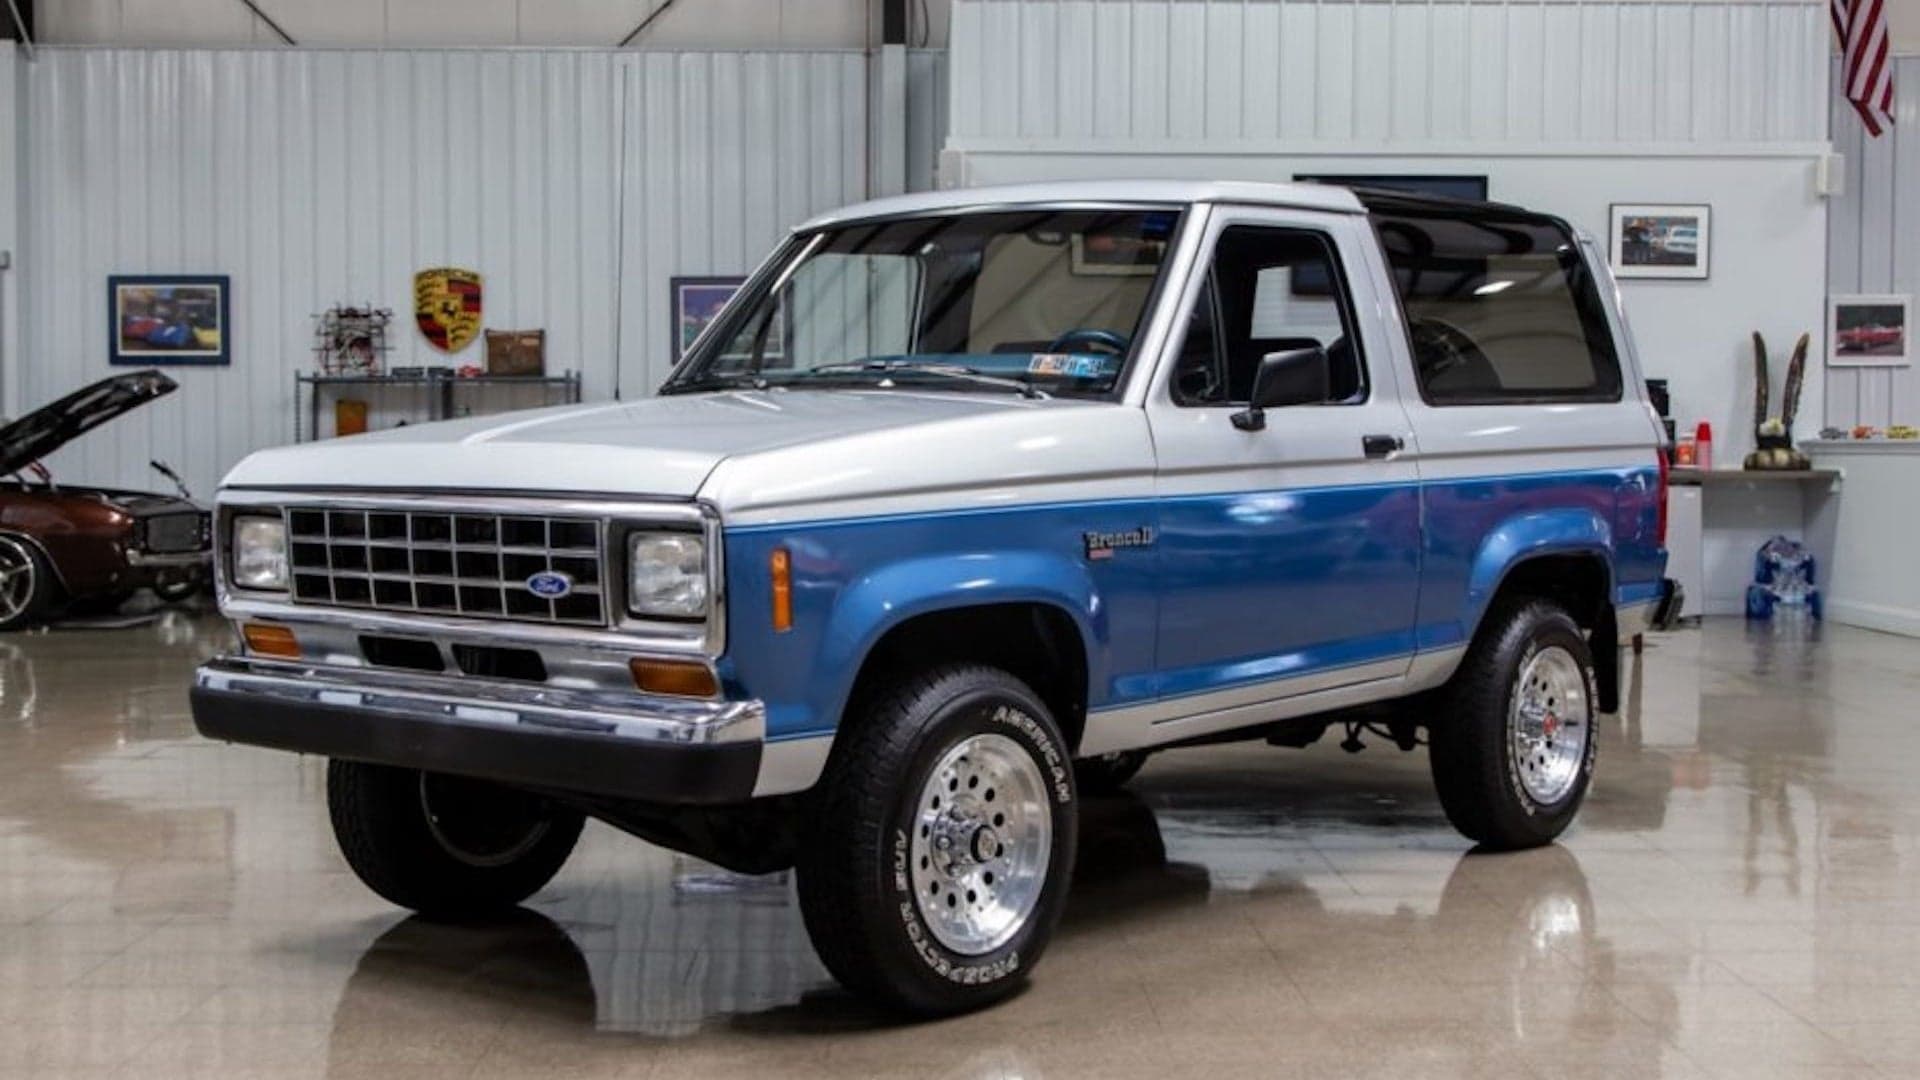 One-Owner 1988 Ford Bronco II for Auction Is Likely the Cleanest Example We’ll Ever See